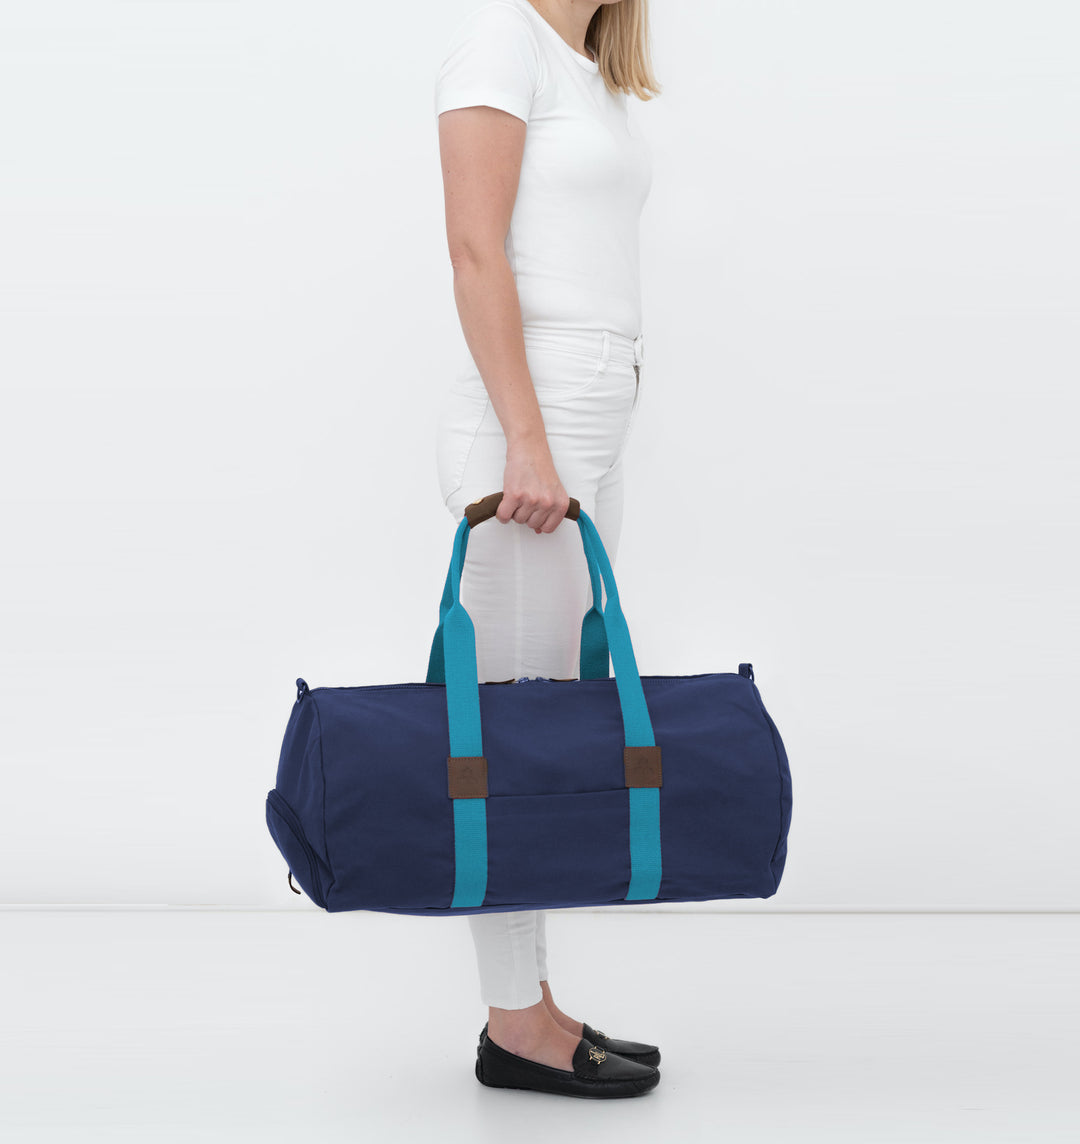 Dufflebag -M- NAVY with turquoise strap